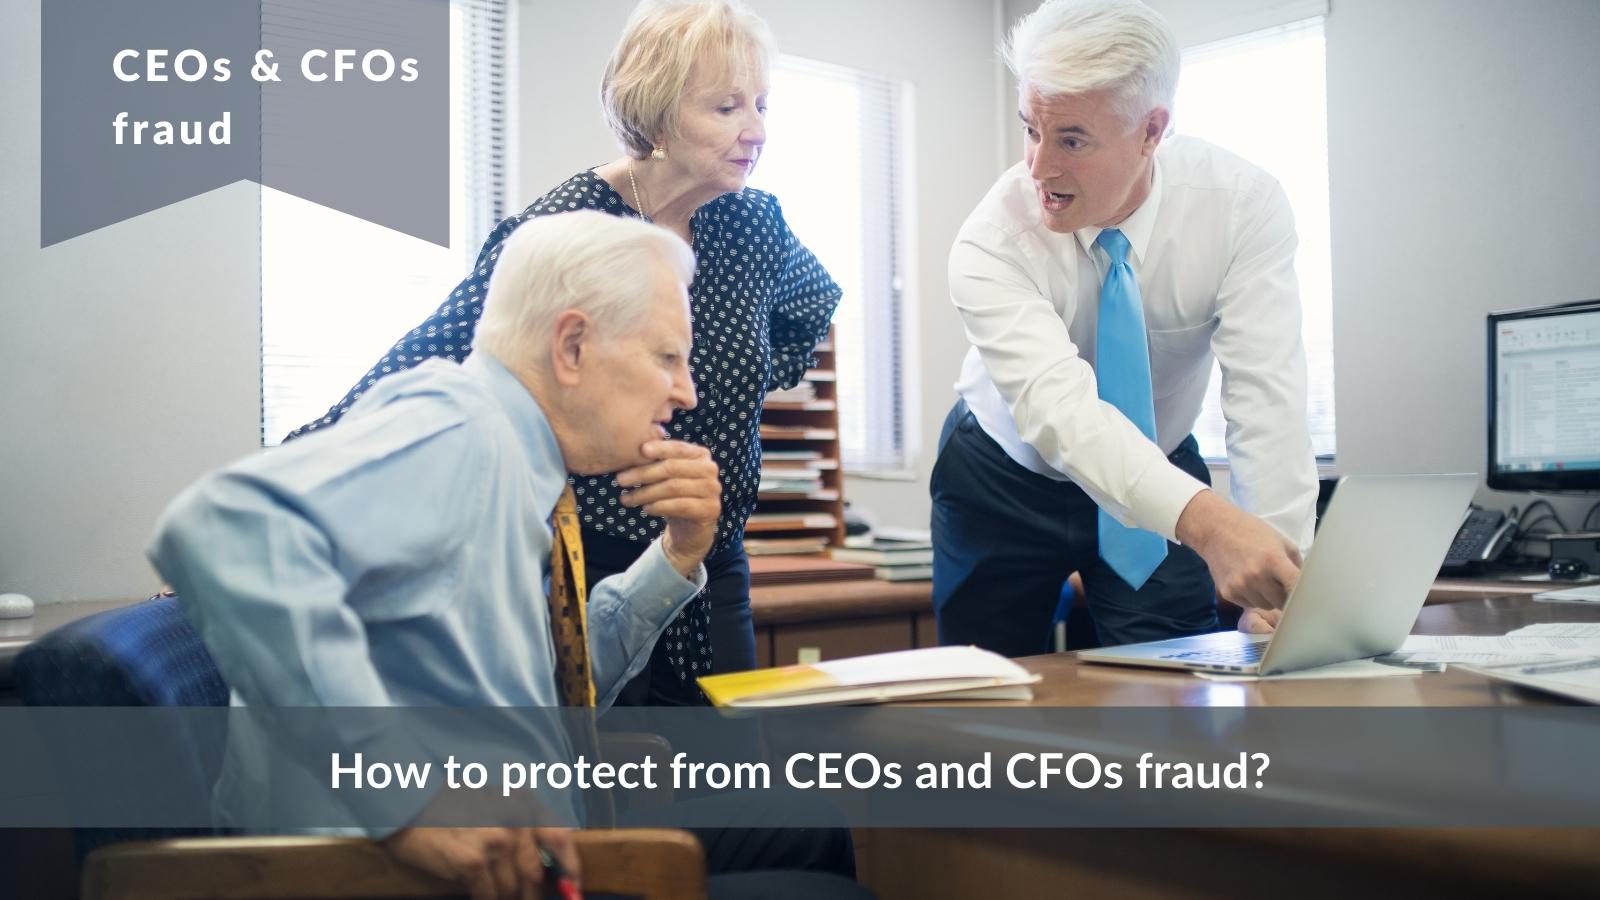 What is email security and how to protect from CEOs and CFOs fraud?